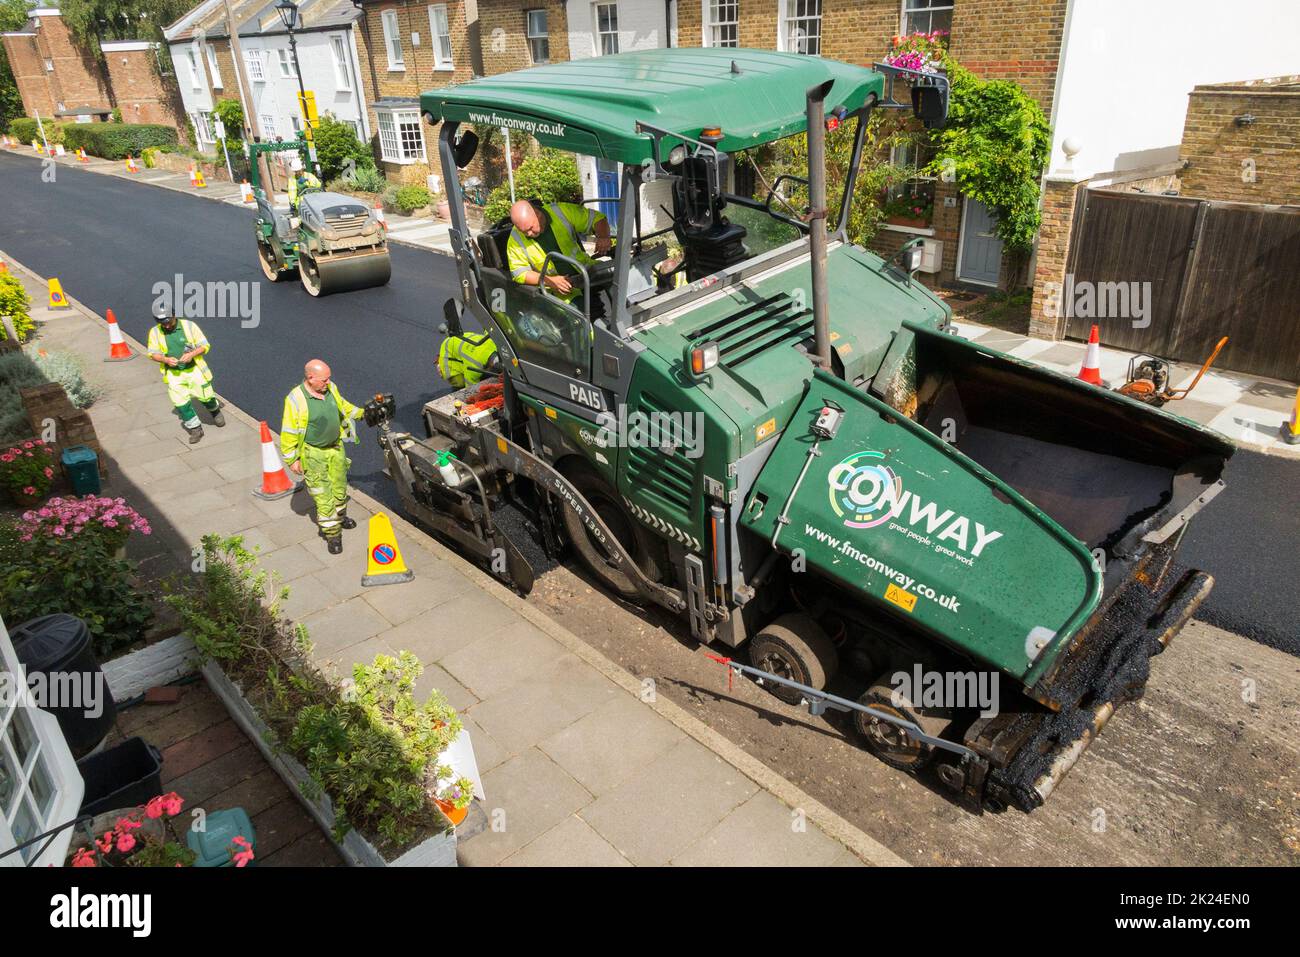 Hot tarmacadam being spread by an asphalt tarmac paver machine during resurfacing of a residential road in Twickenham, Greater London, UK. It is being resurfaced after the previous worn and potholed surface has been removed. (132) Stock Photo